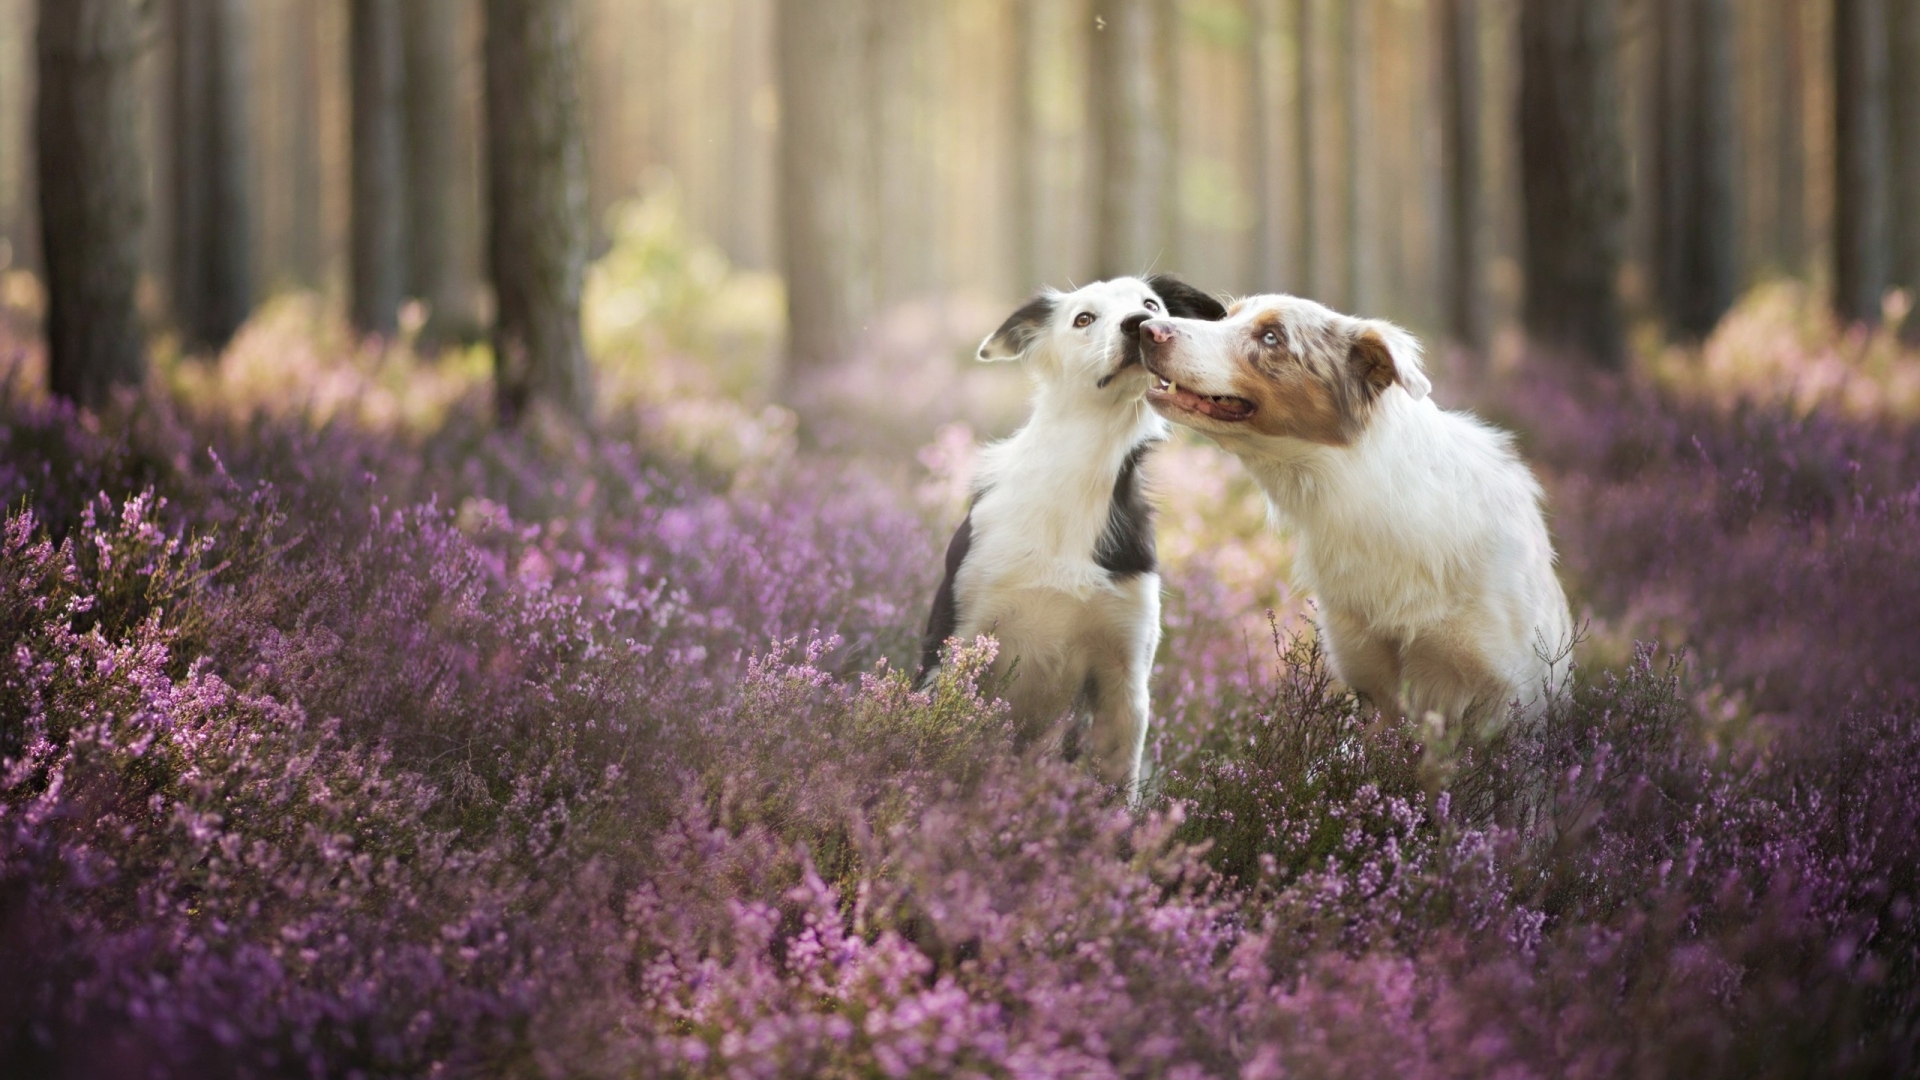 Cute Dogs Playing for 1920 x 1080 HDTV 1080p resolution